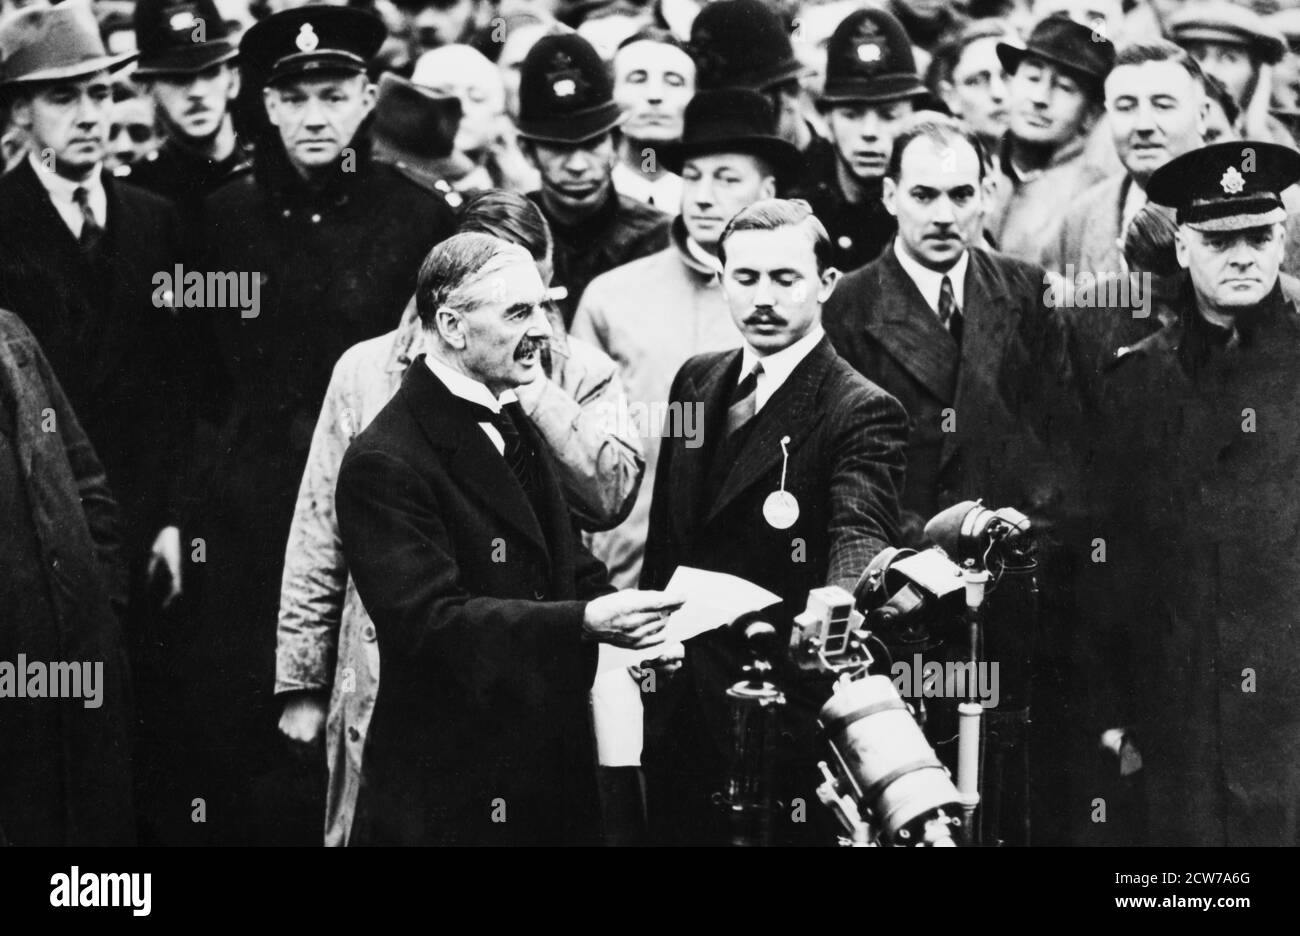 HESTON AERODROME, LONDON - SEPTEMBER 30: Neville Chamberlain, British Prime Minister, arrives home to Heston Aerodrome, London after meeting with Adolf Hitler, on September 30, 1938. He waved a piece of paper, declaring that we have “Peace for our time” Seeking to avoid war in Europe, leaders from Britain, France and Italy signed the Munich Pact, agreeing to Hitler's demands and ceding Czechoslovakia to Germany. Stock Photo